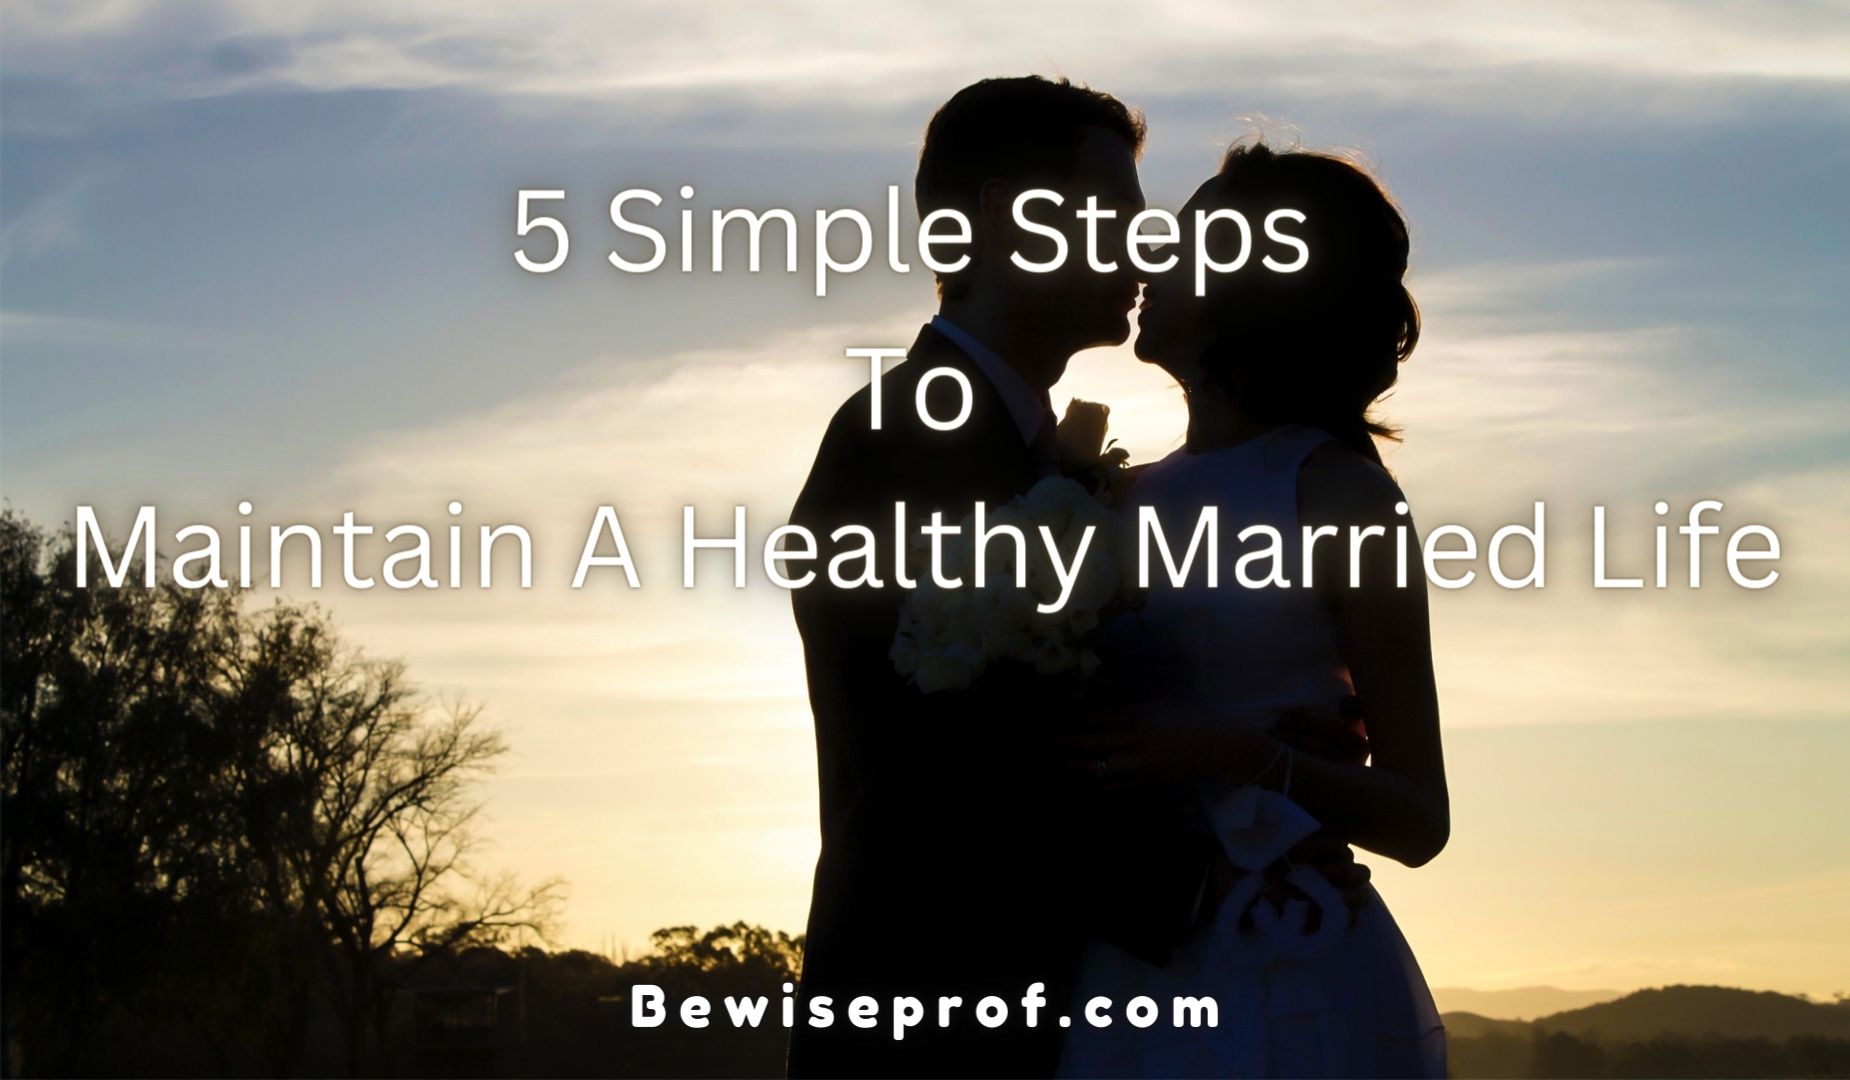 5 Simple Steps To Maintain A Healthy Married Life